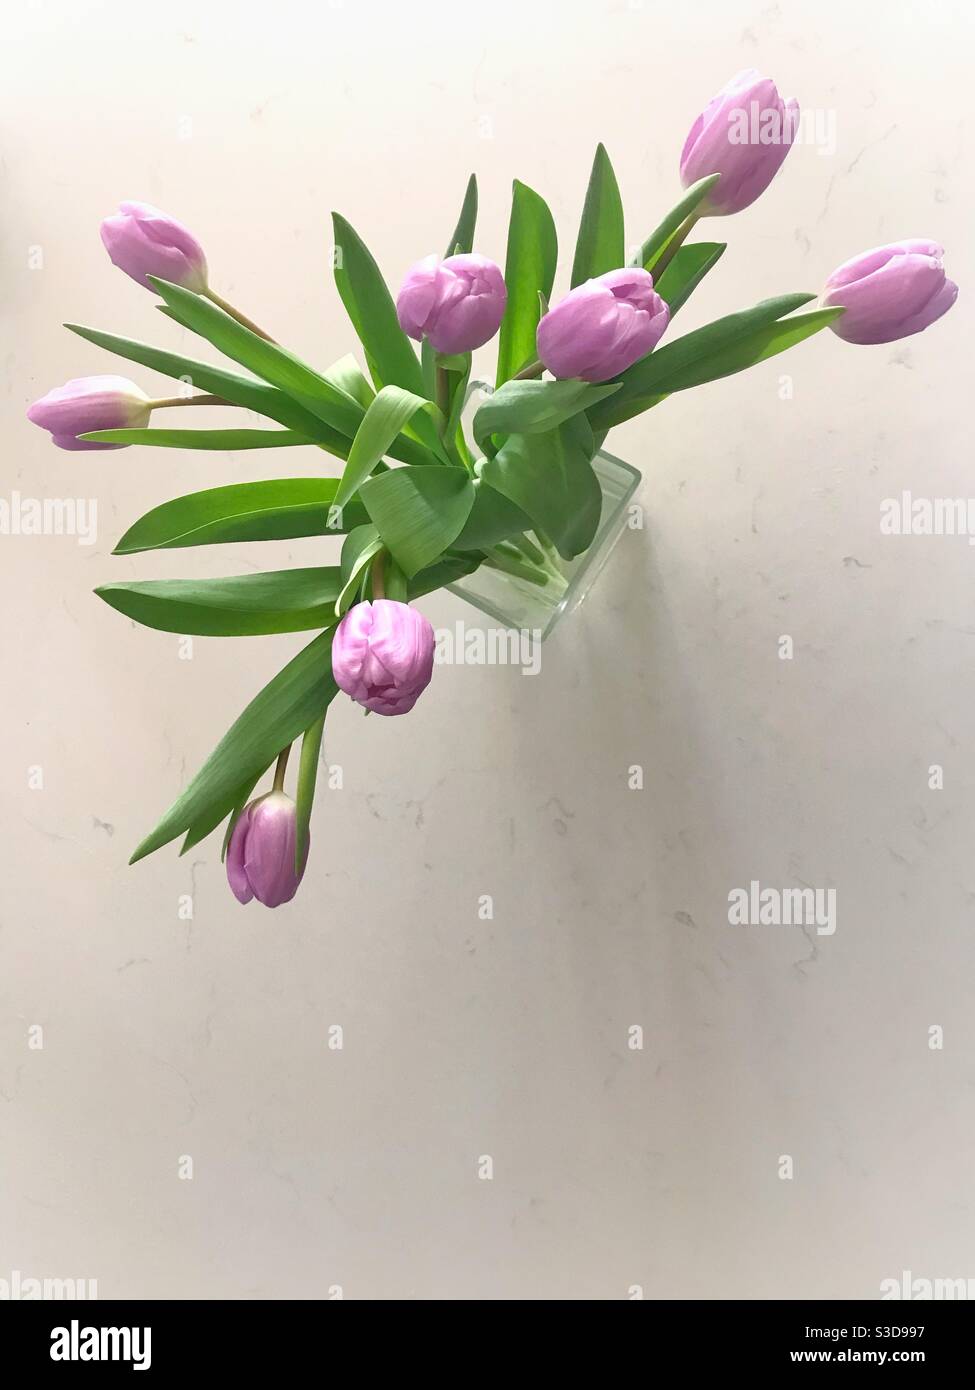 Pale lilac tulips in a glass vase on a white worktop Stock Photo